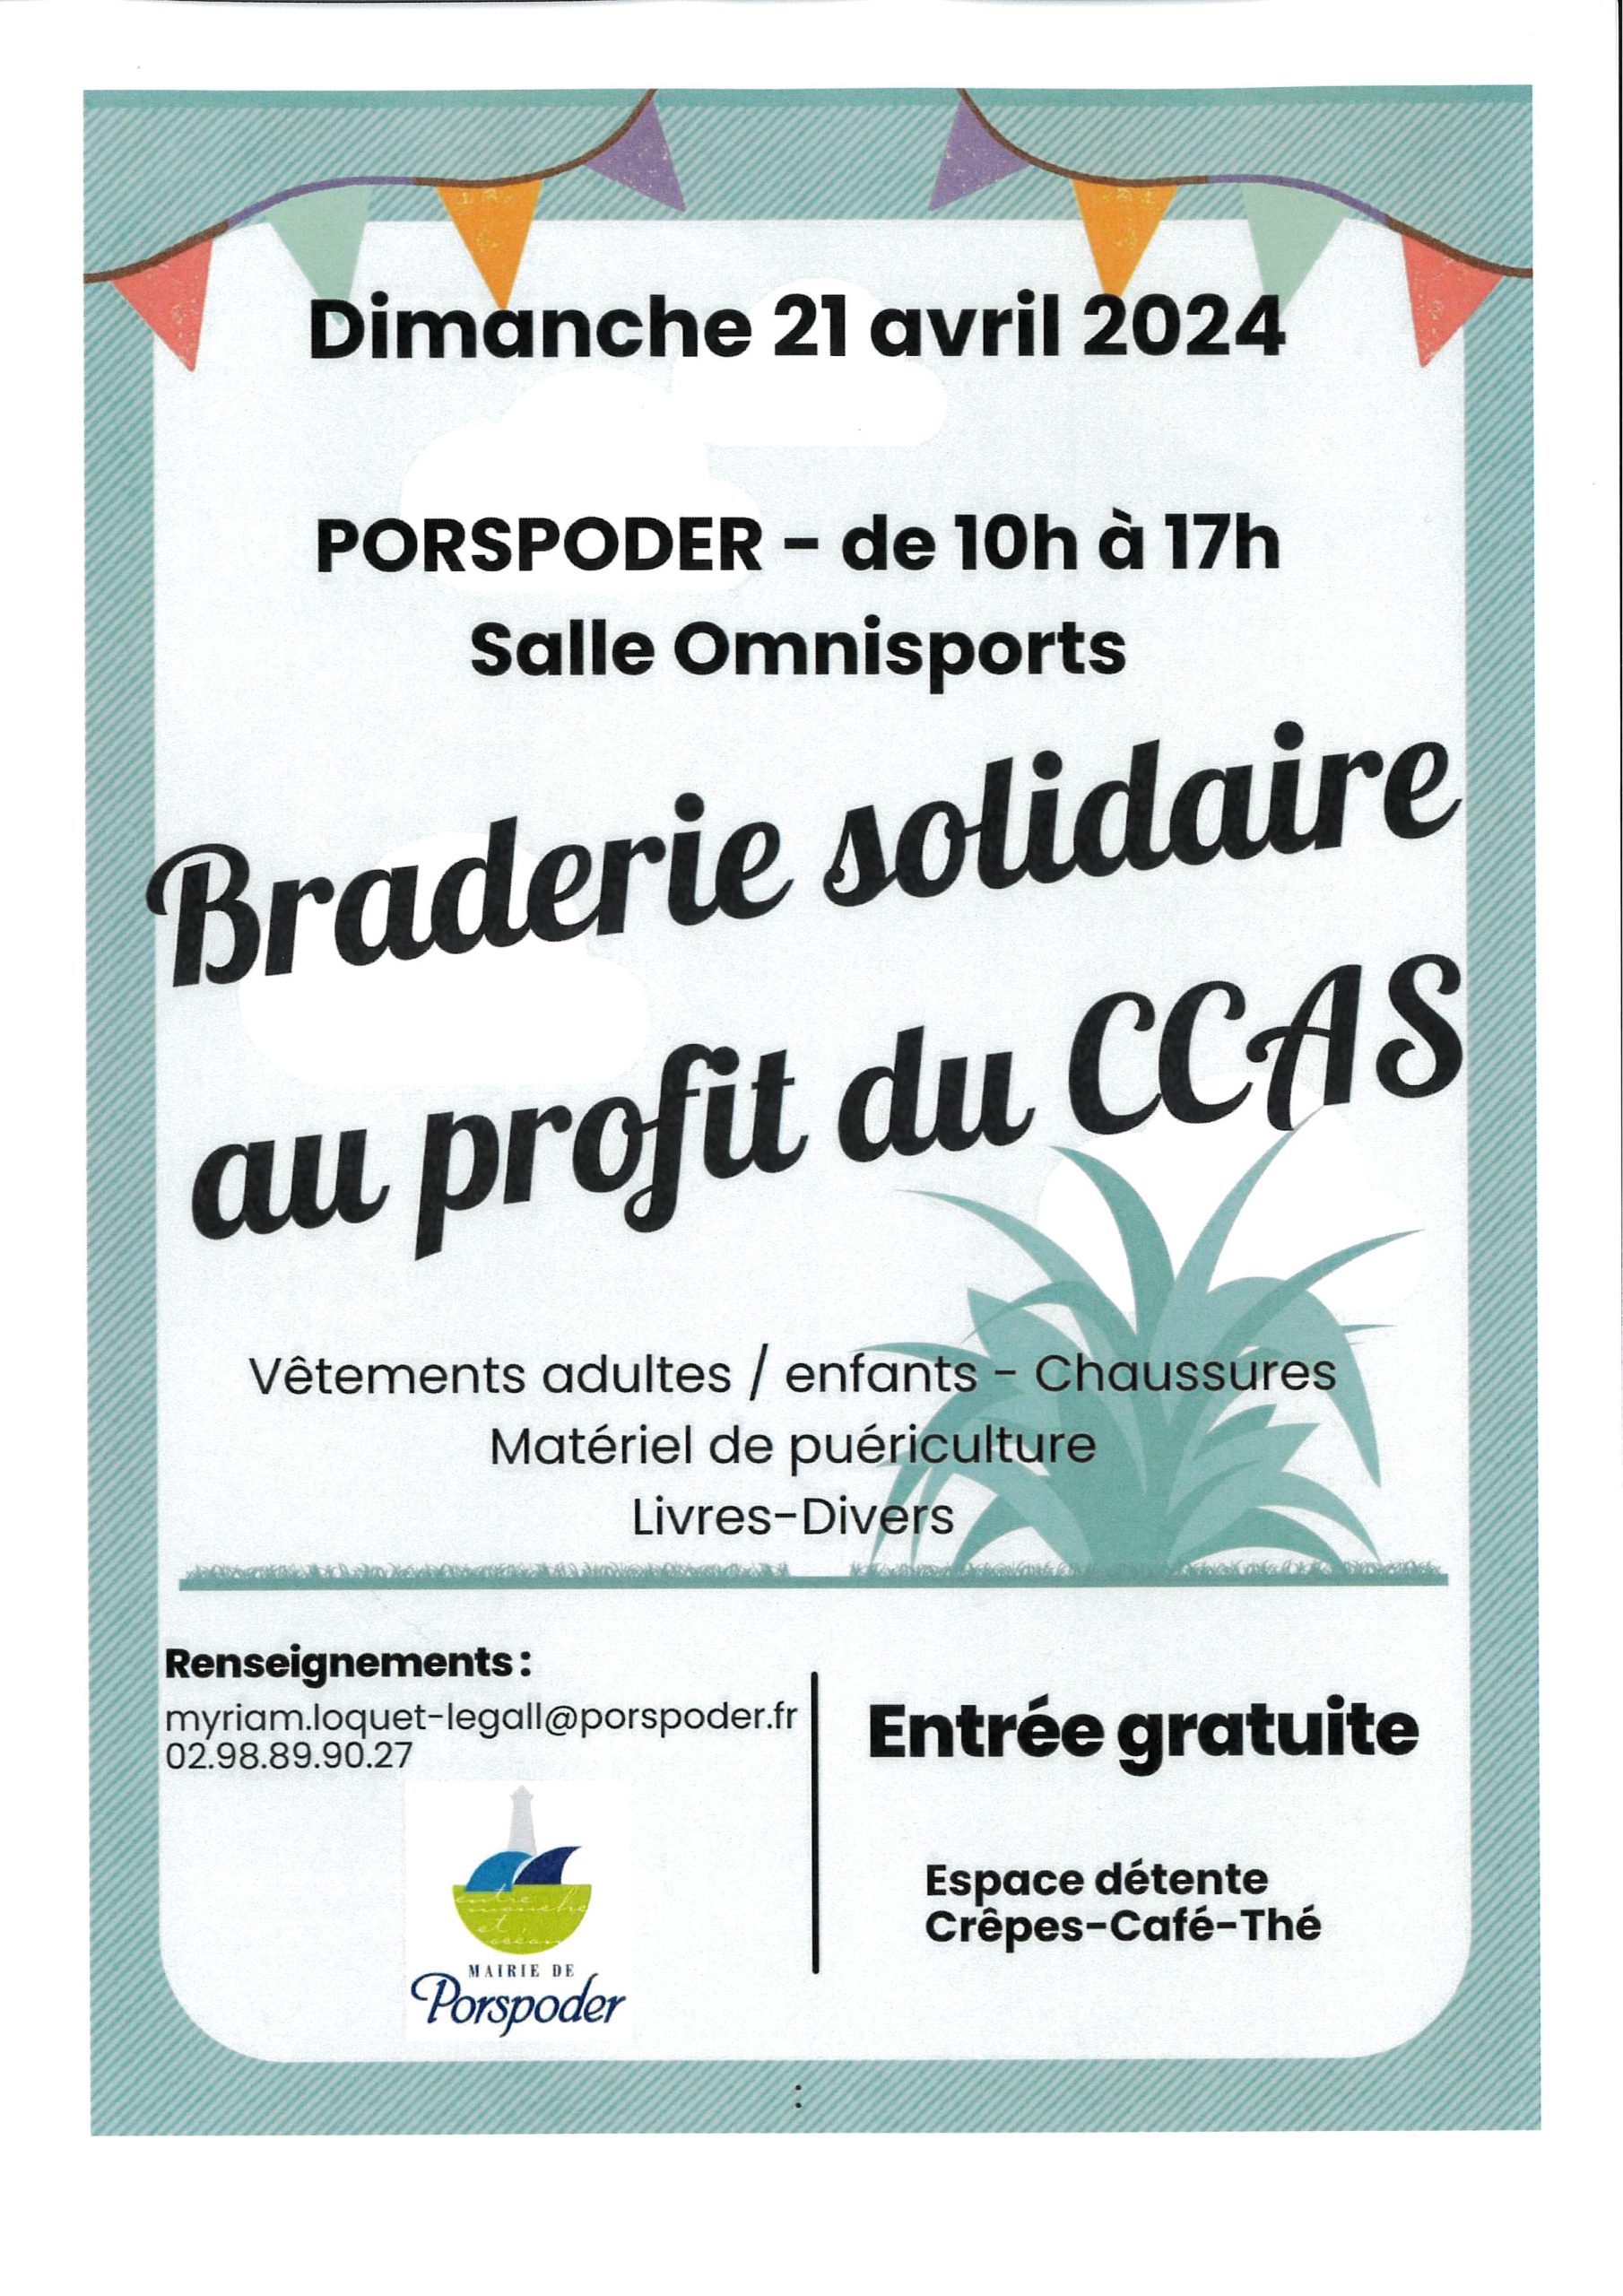 Braderie Solidaire CCAS